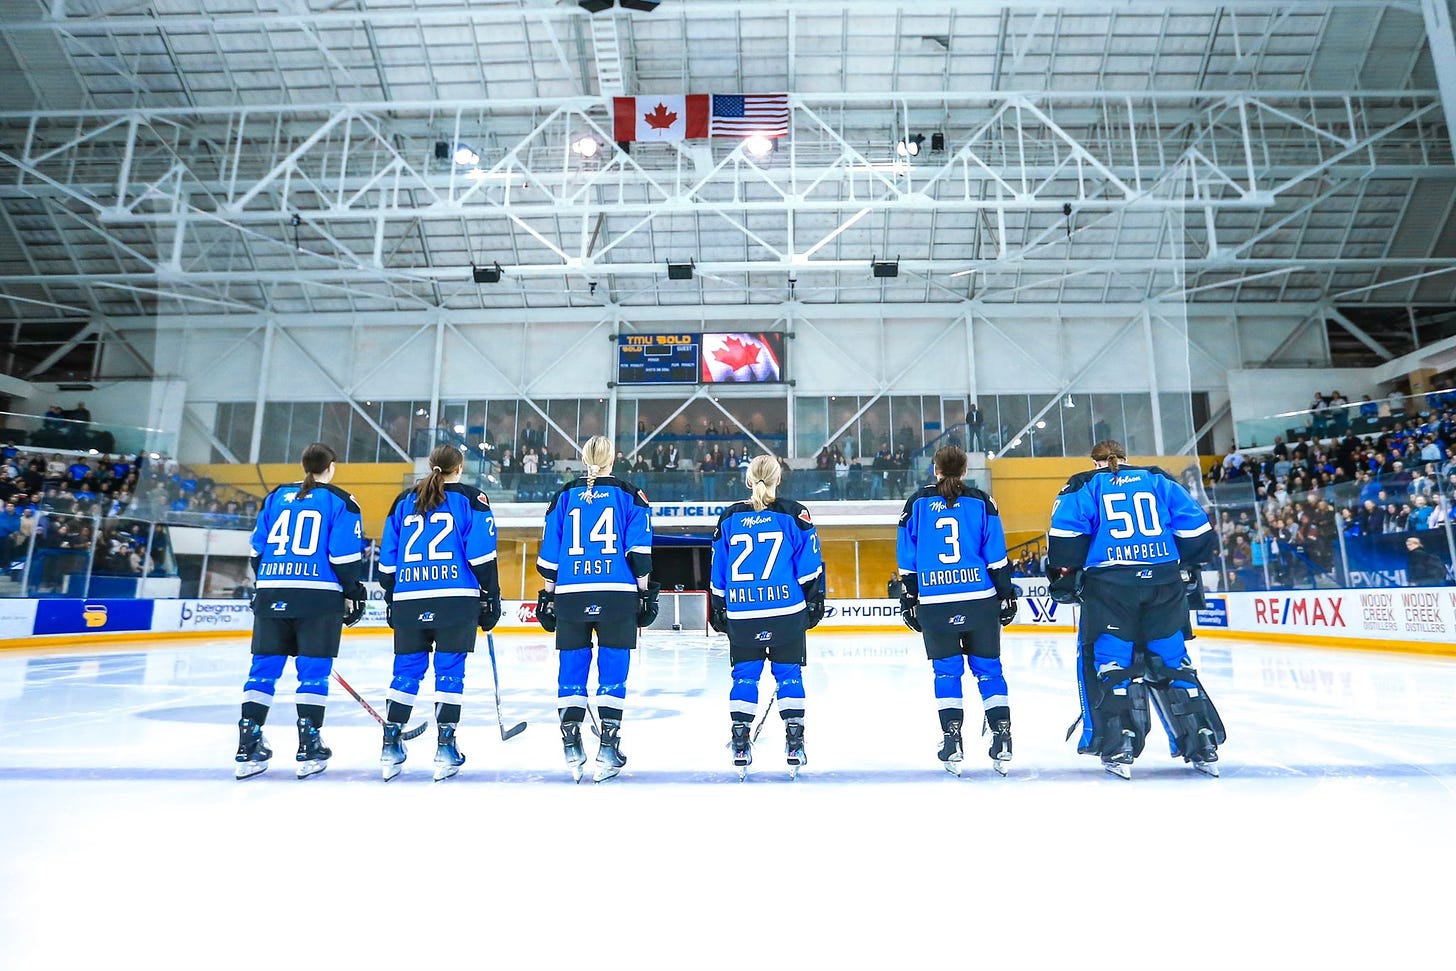 Five PWHL Toronto players, Turnbull, Connors, Fast, Maltais, Larocque, and Campbell, standing at center ice for the national anthem.